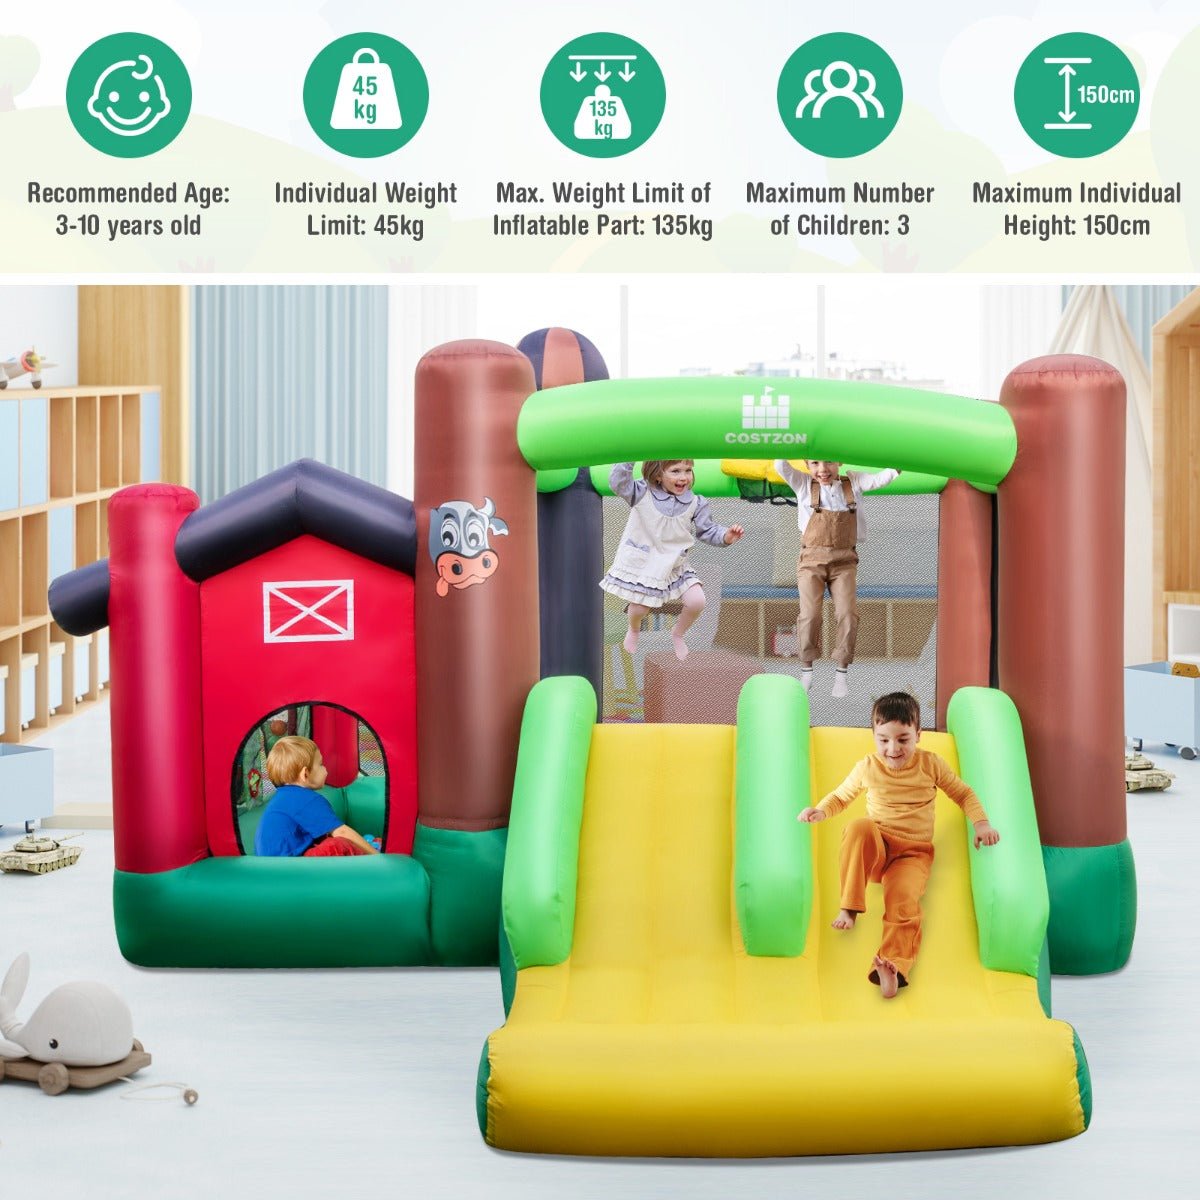 Outdoor Inflatable Play Structure - Dual Slides for Kids Outdoor Joy